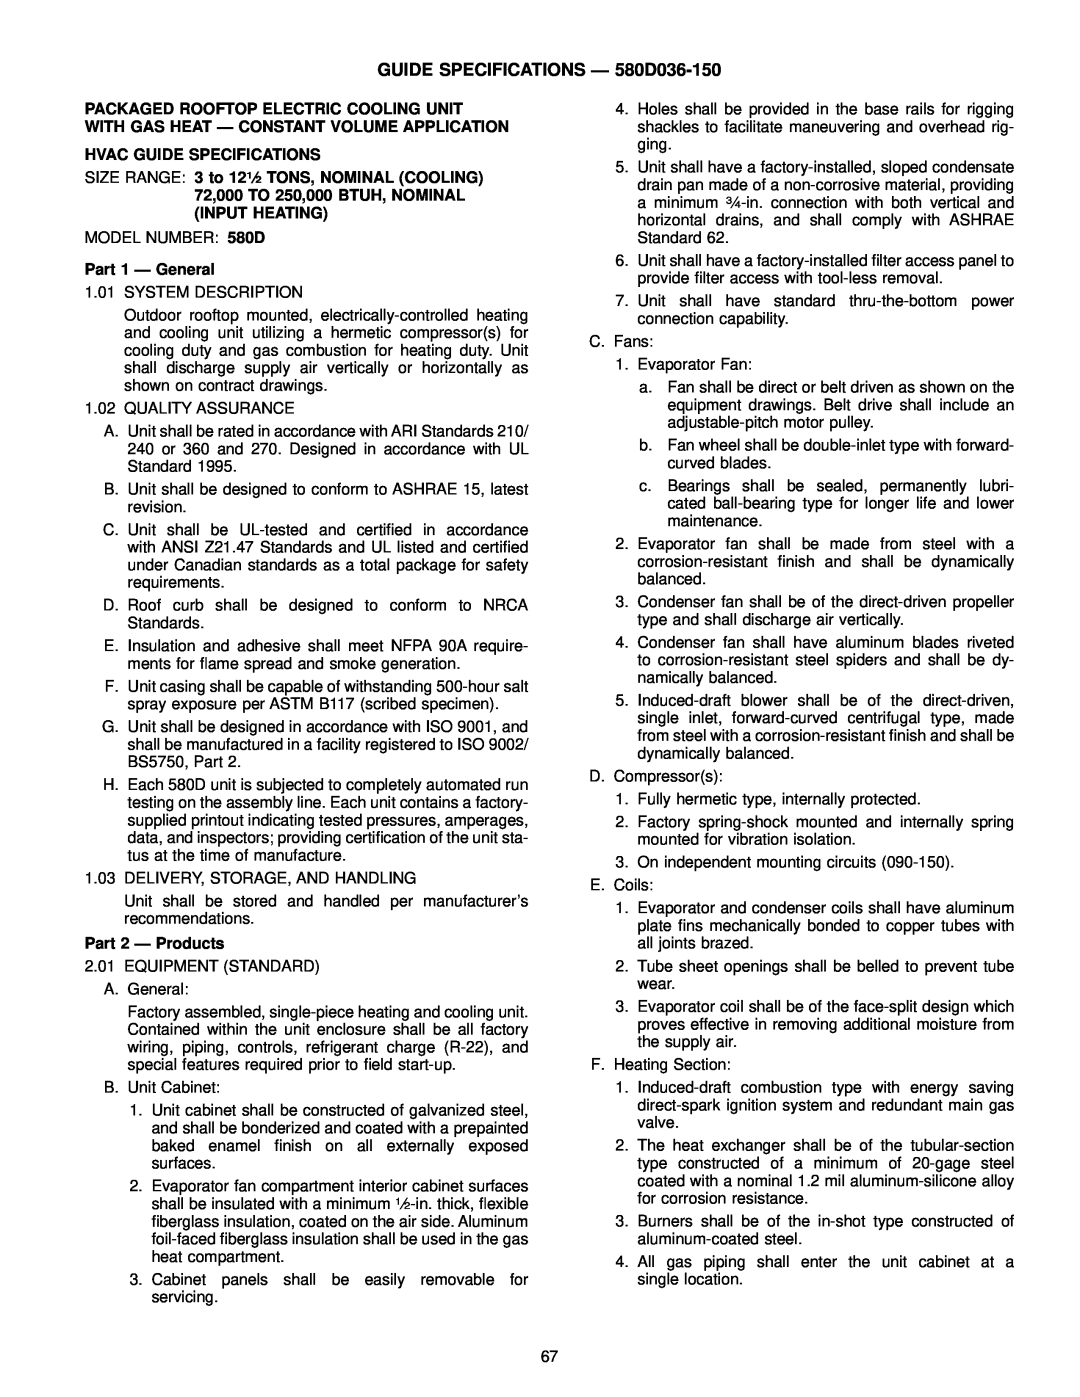 Bryant manual GUIDE SPECIFICATIONS Ð 580D036-150, Hvac Guide Specifications, Part 1 Ð General, Part 2 Ð Products 